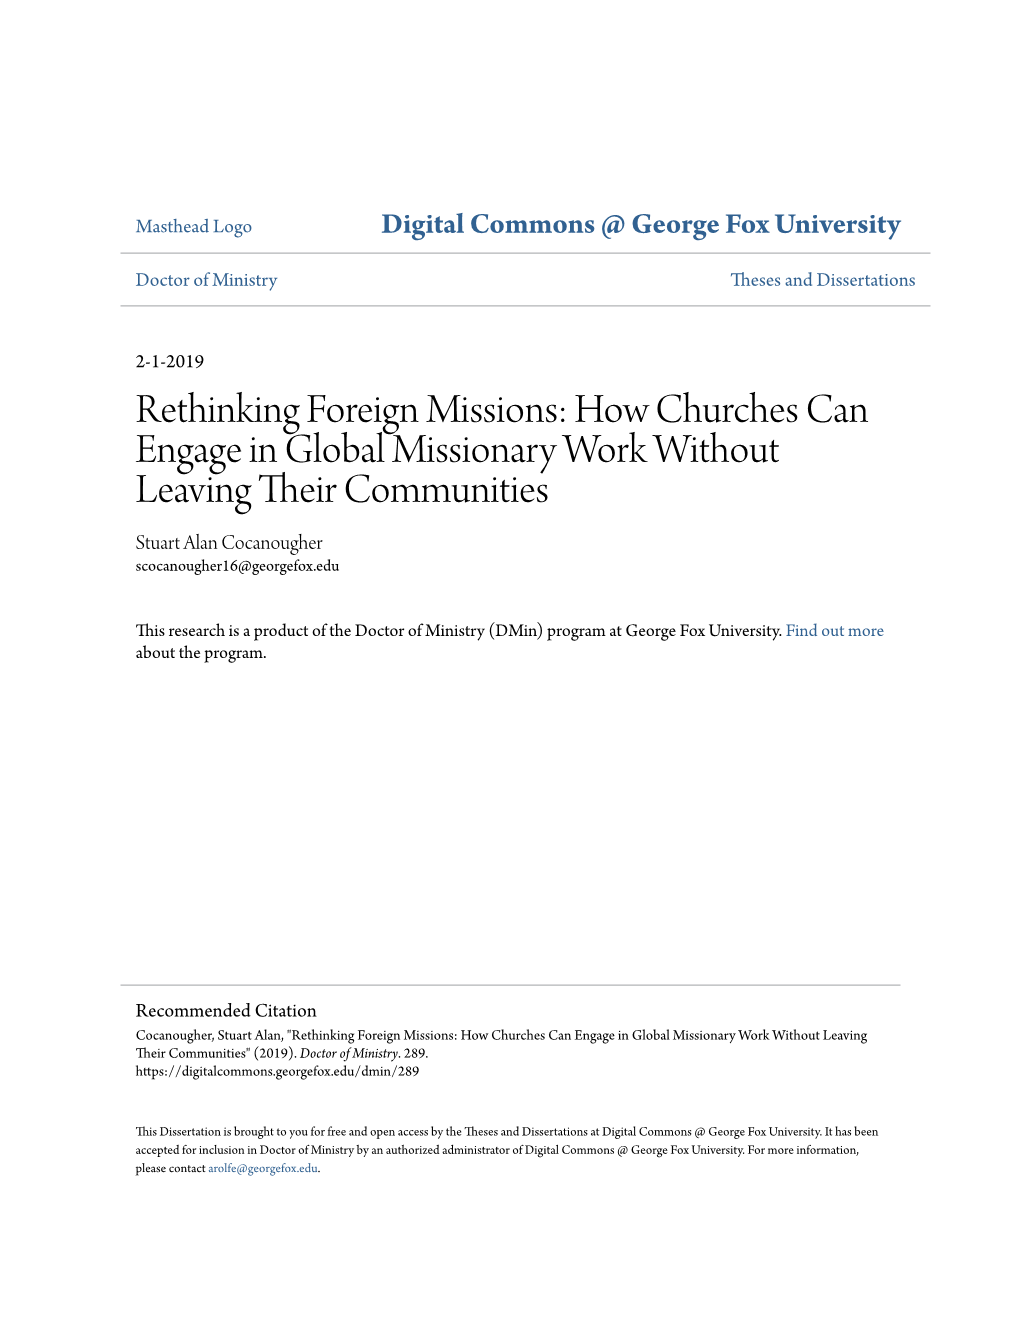 Rethinking Foreign Missions: How Churches Can Engage in Global Missionary Work Without Leaving Their Ommc Unities Stuart Alan Cocanougher Scocanougher16@Georgefox.Edu